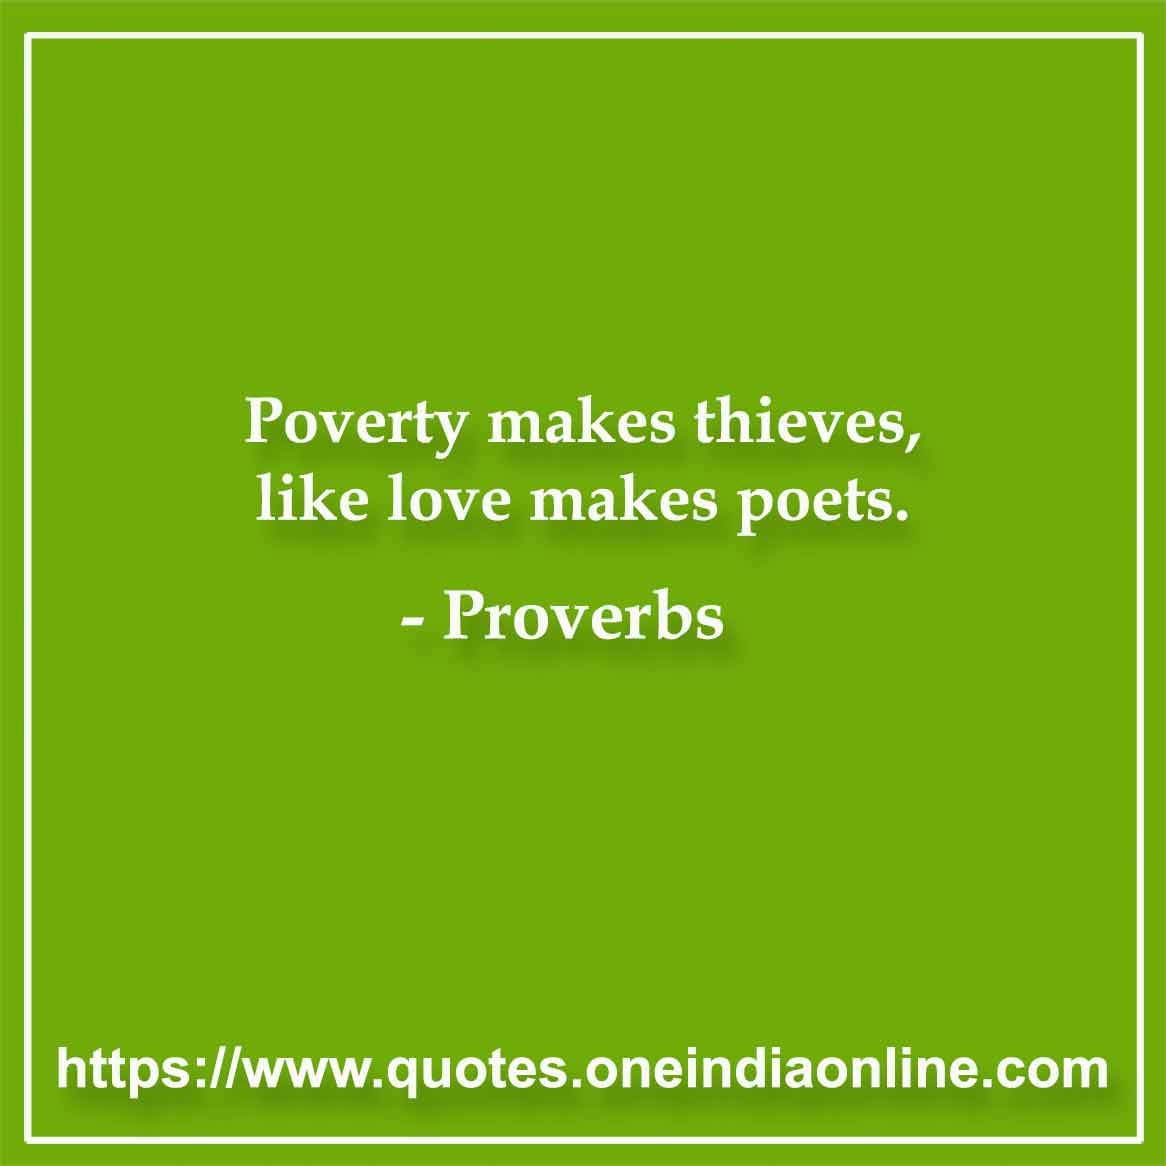 Poverty makes thieves, like love makes poets.

Indian Proverbs